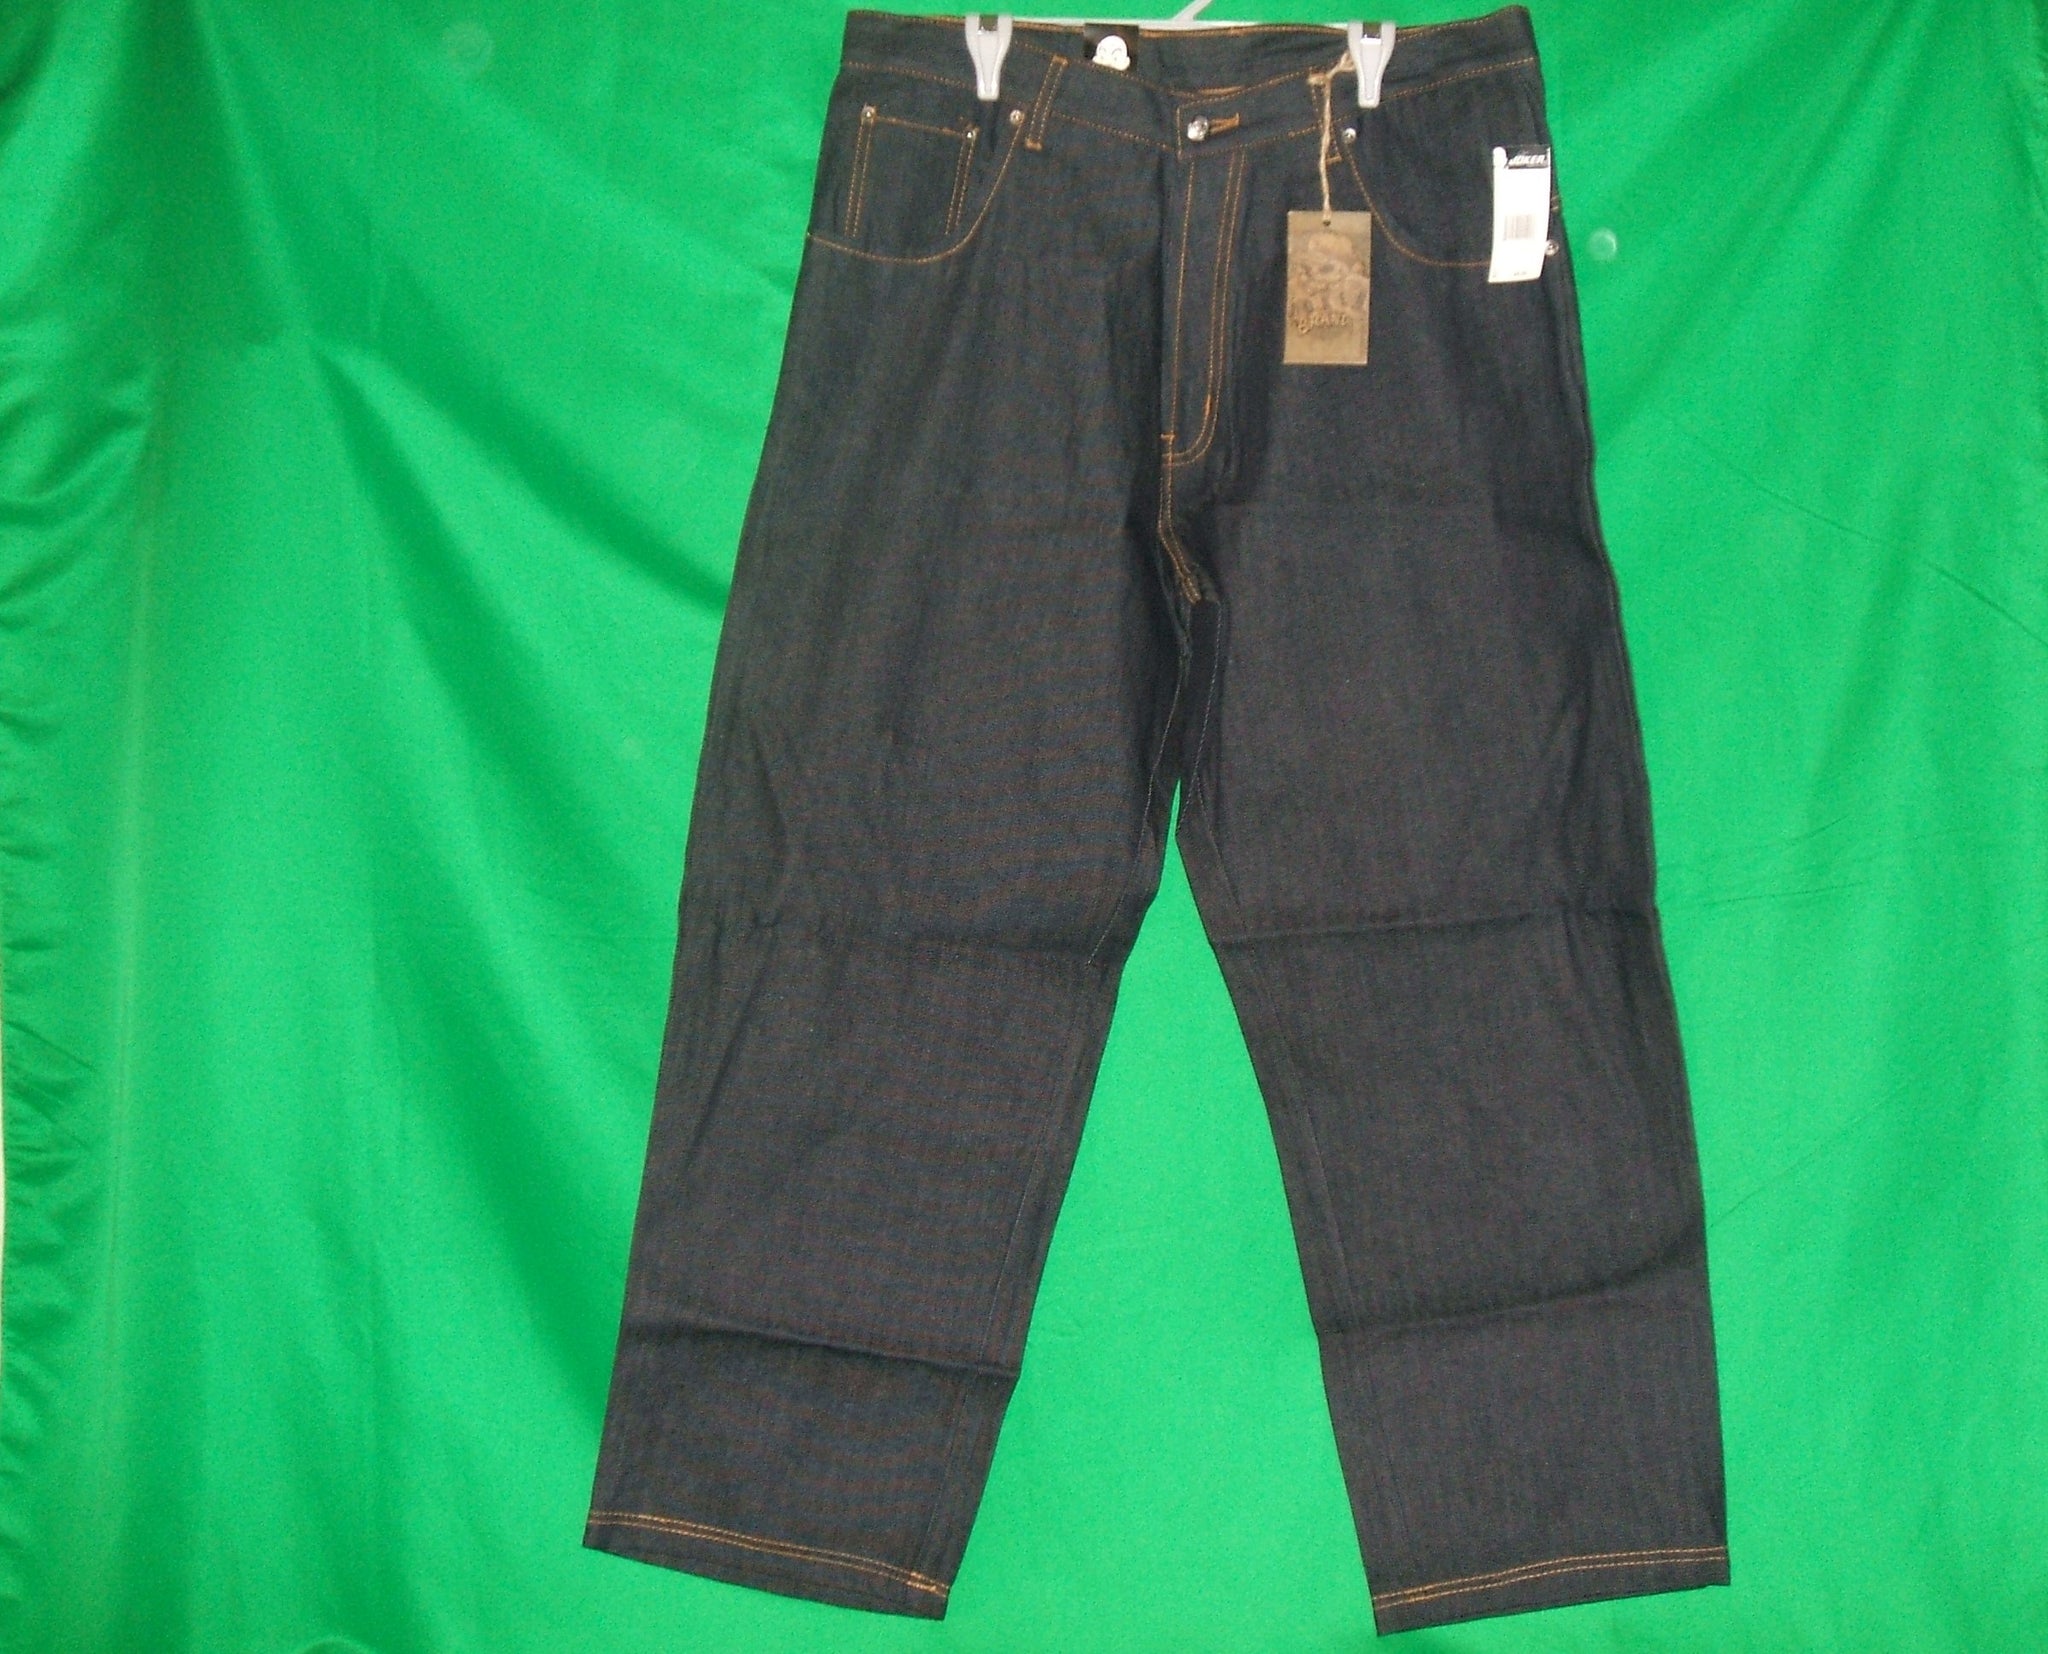 branded company jeans pant